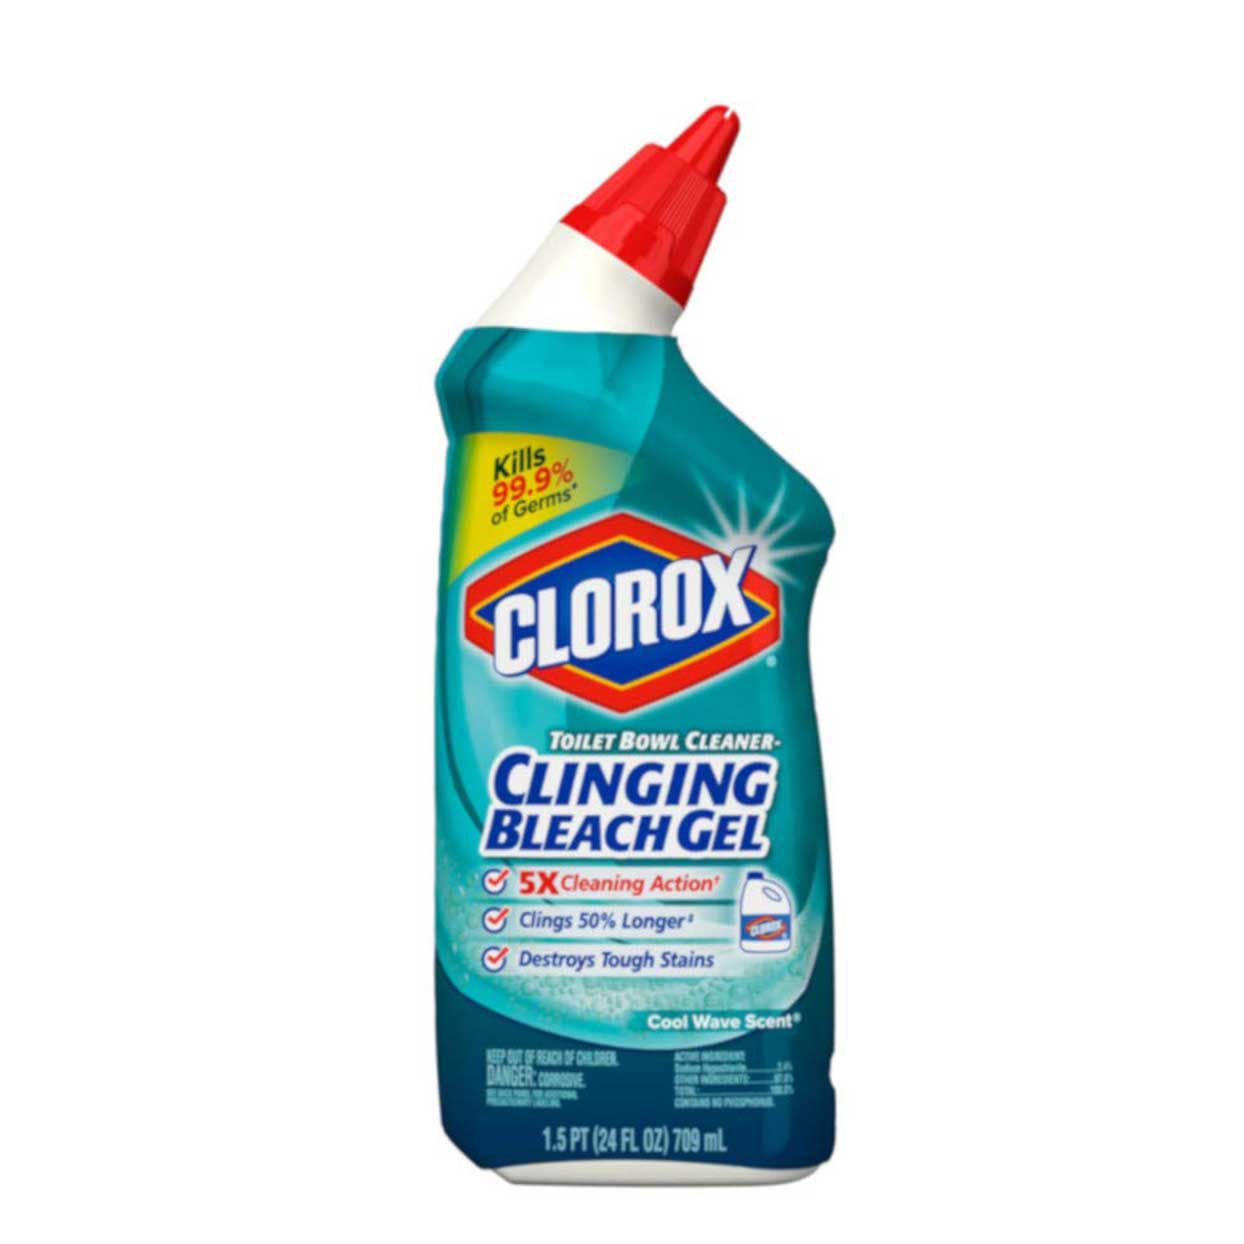 Clorox Toilet Bowl Cleaner, Clinging Bleach Gel, Cool Wave Scent